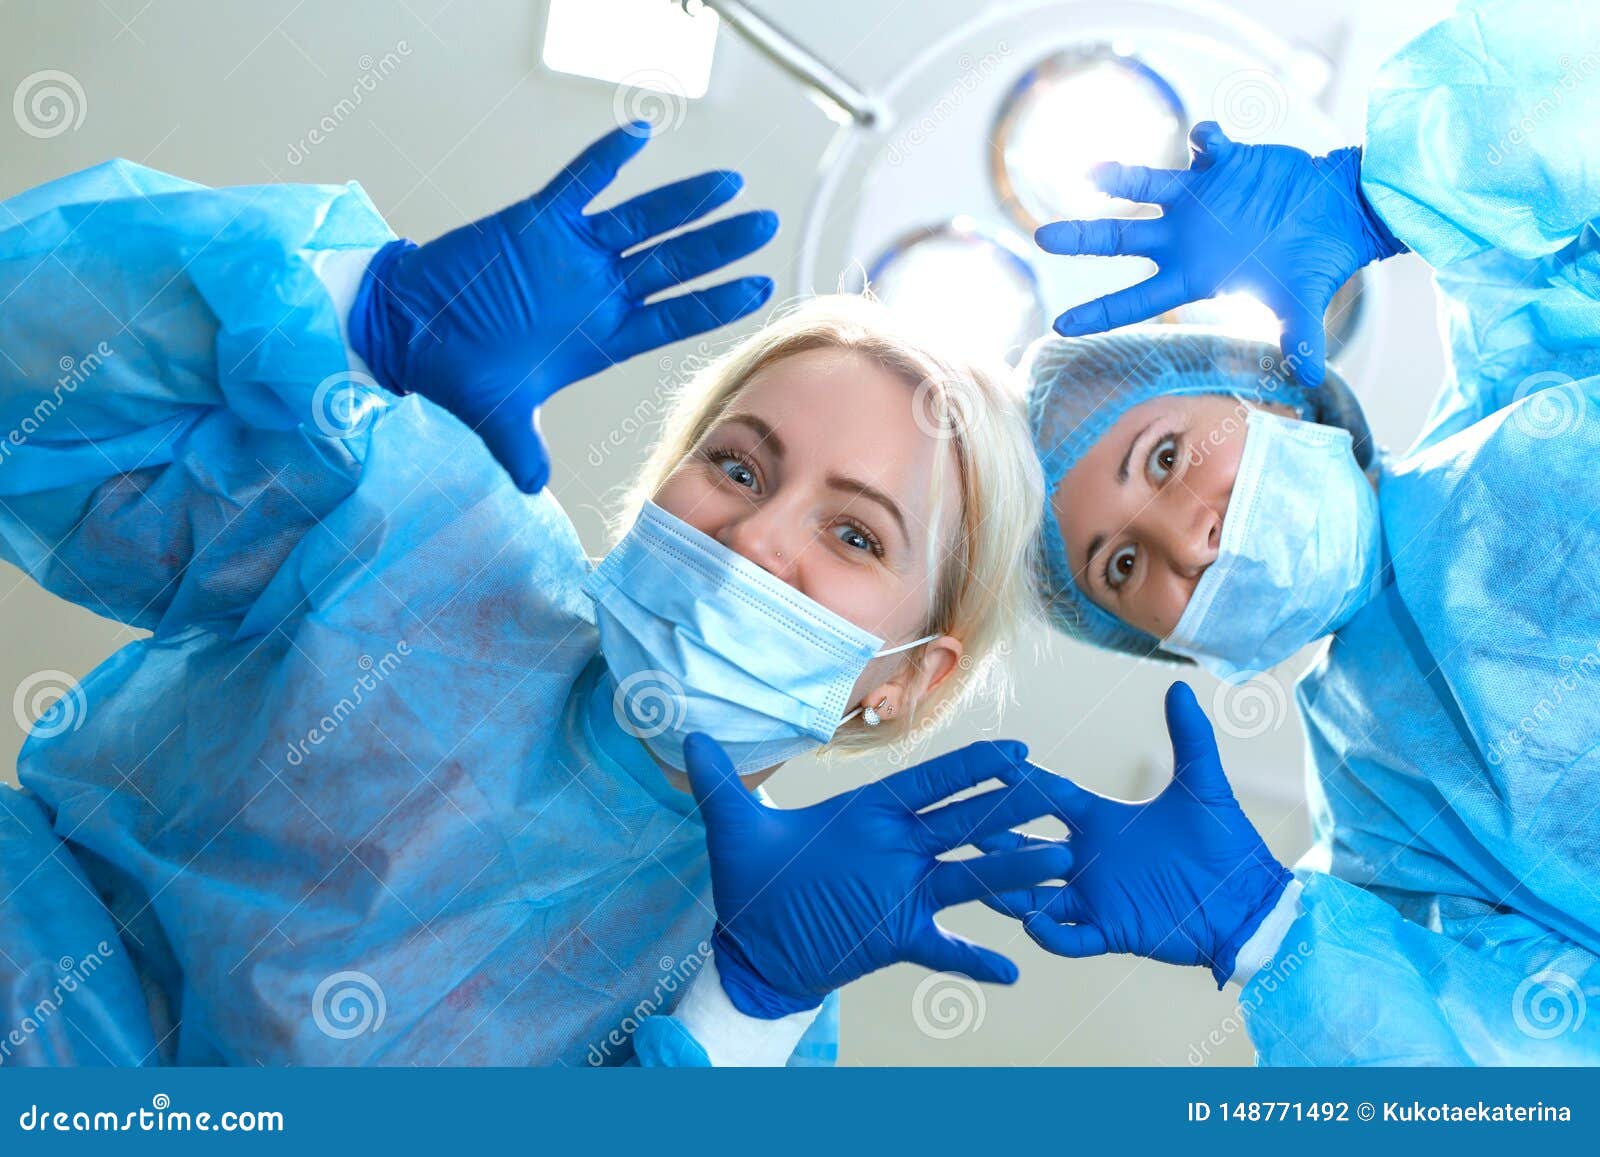 Young Women Surgeons Funny Kidding on Camera at Operation Room Background  Stock Photo - Image of confident, funny: 148771492